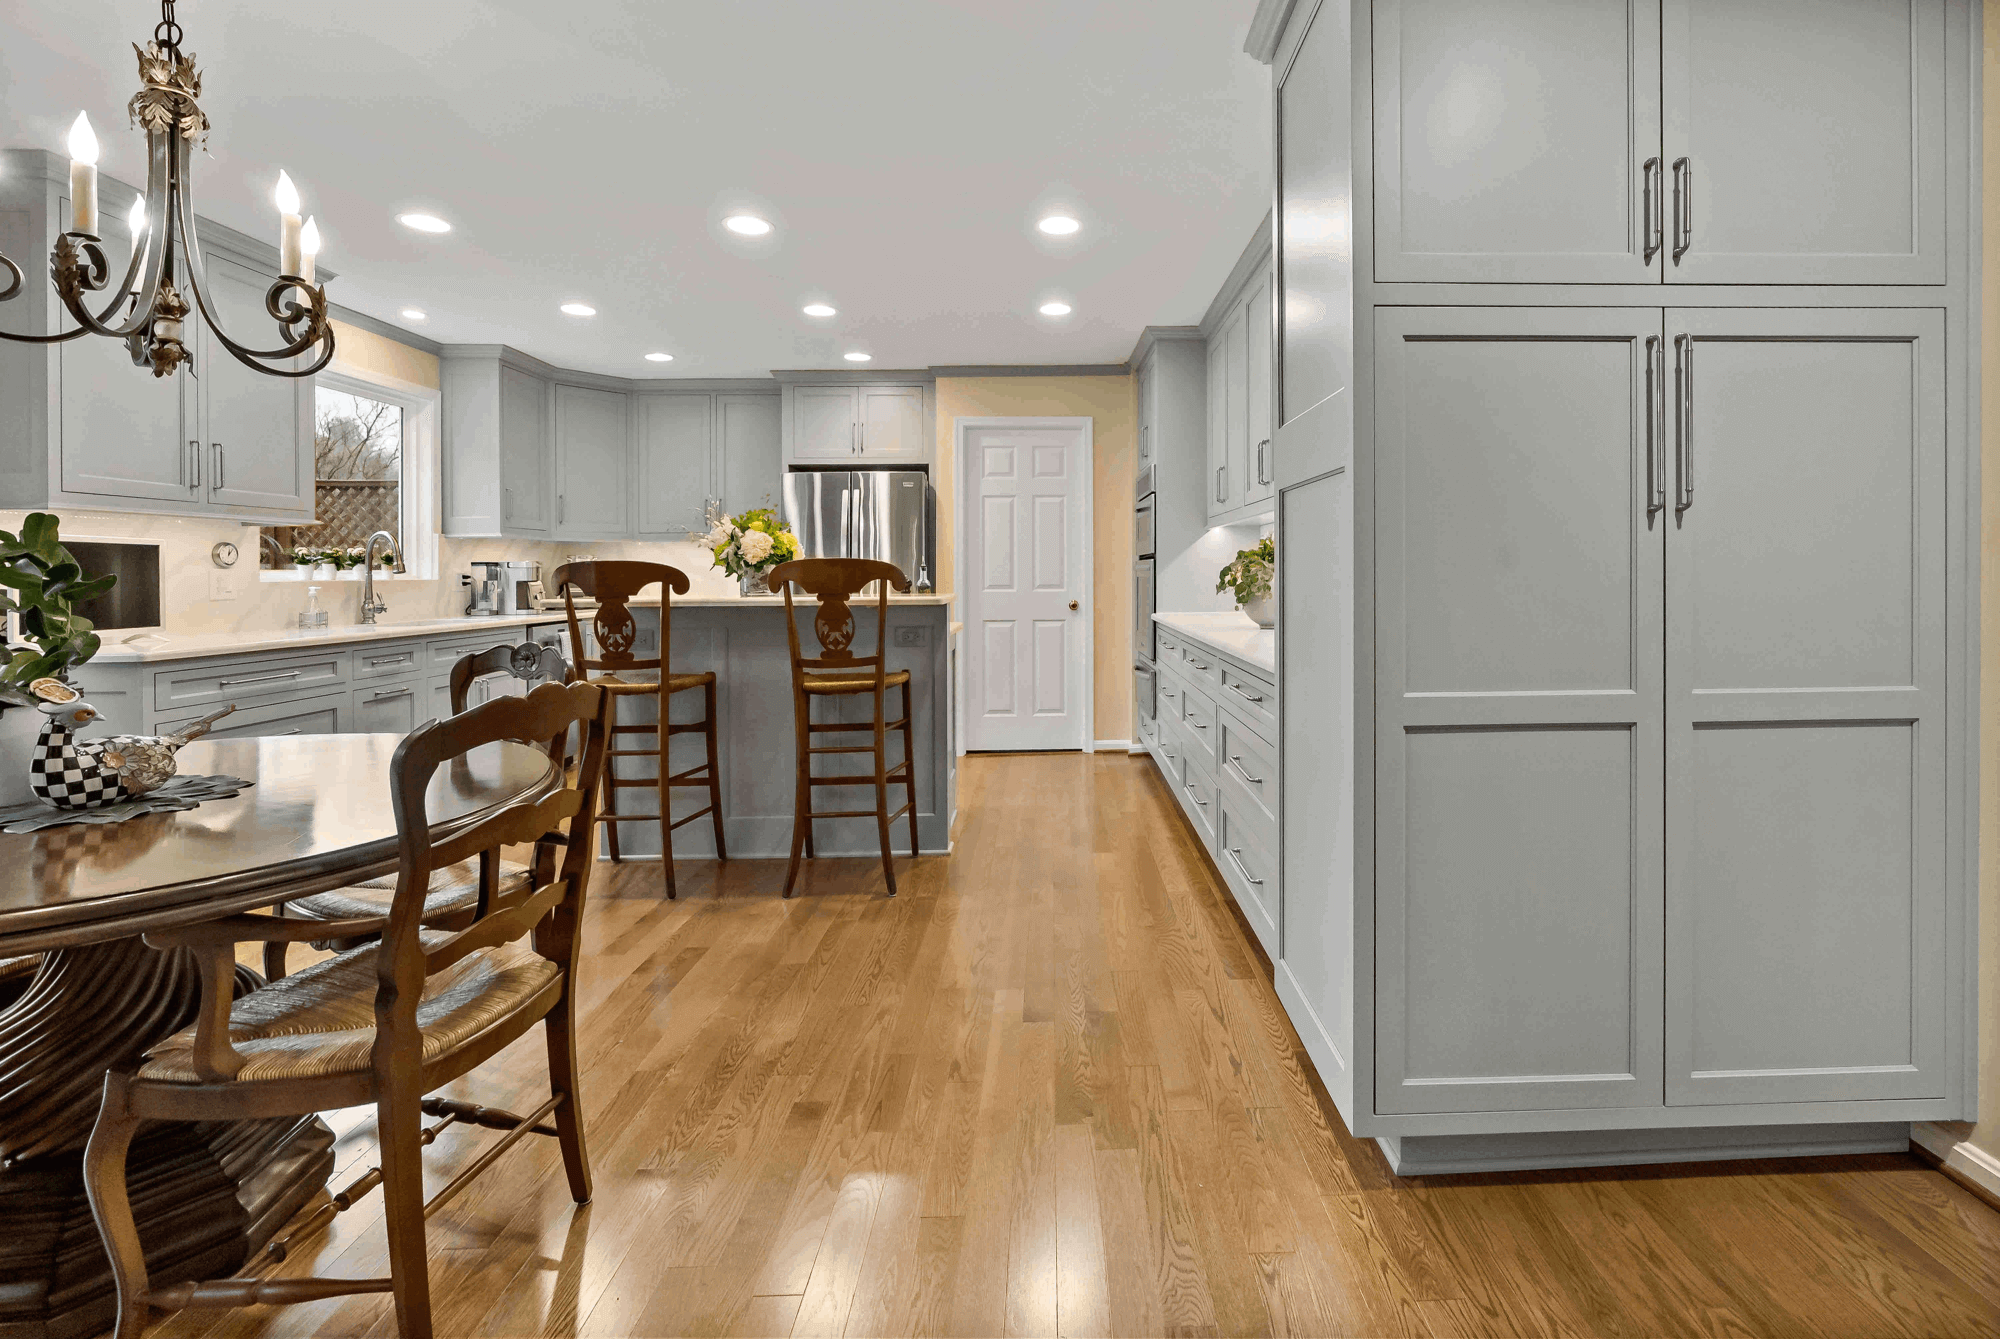 Hard wood floors and wooden chairs in light grey kitchen